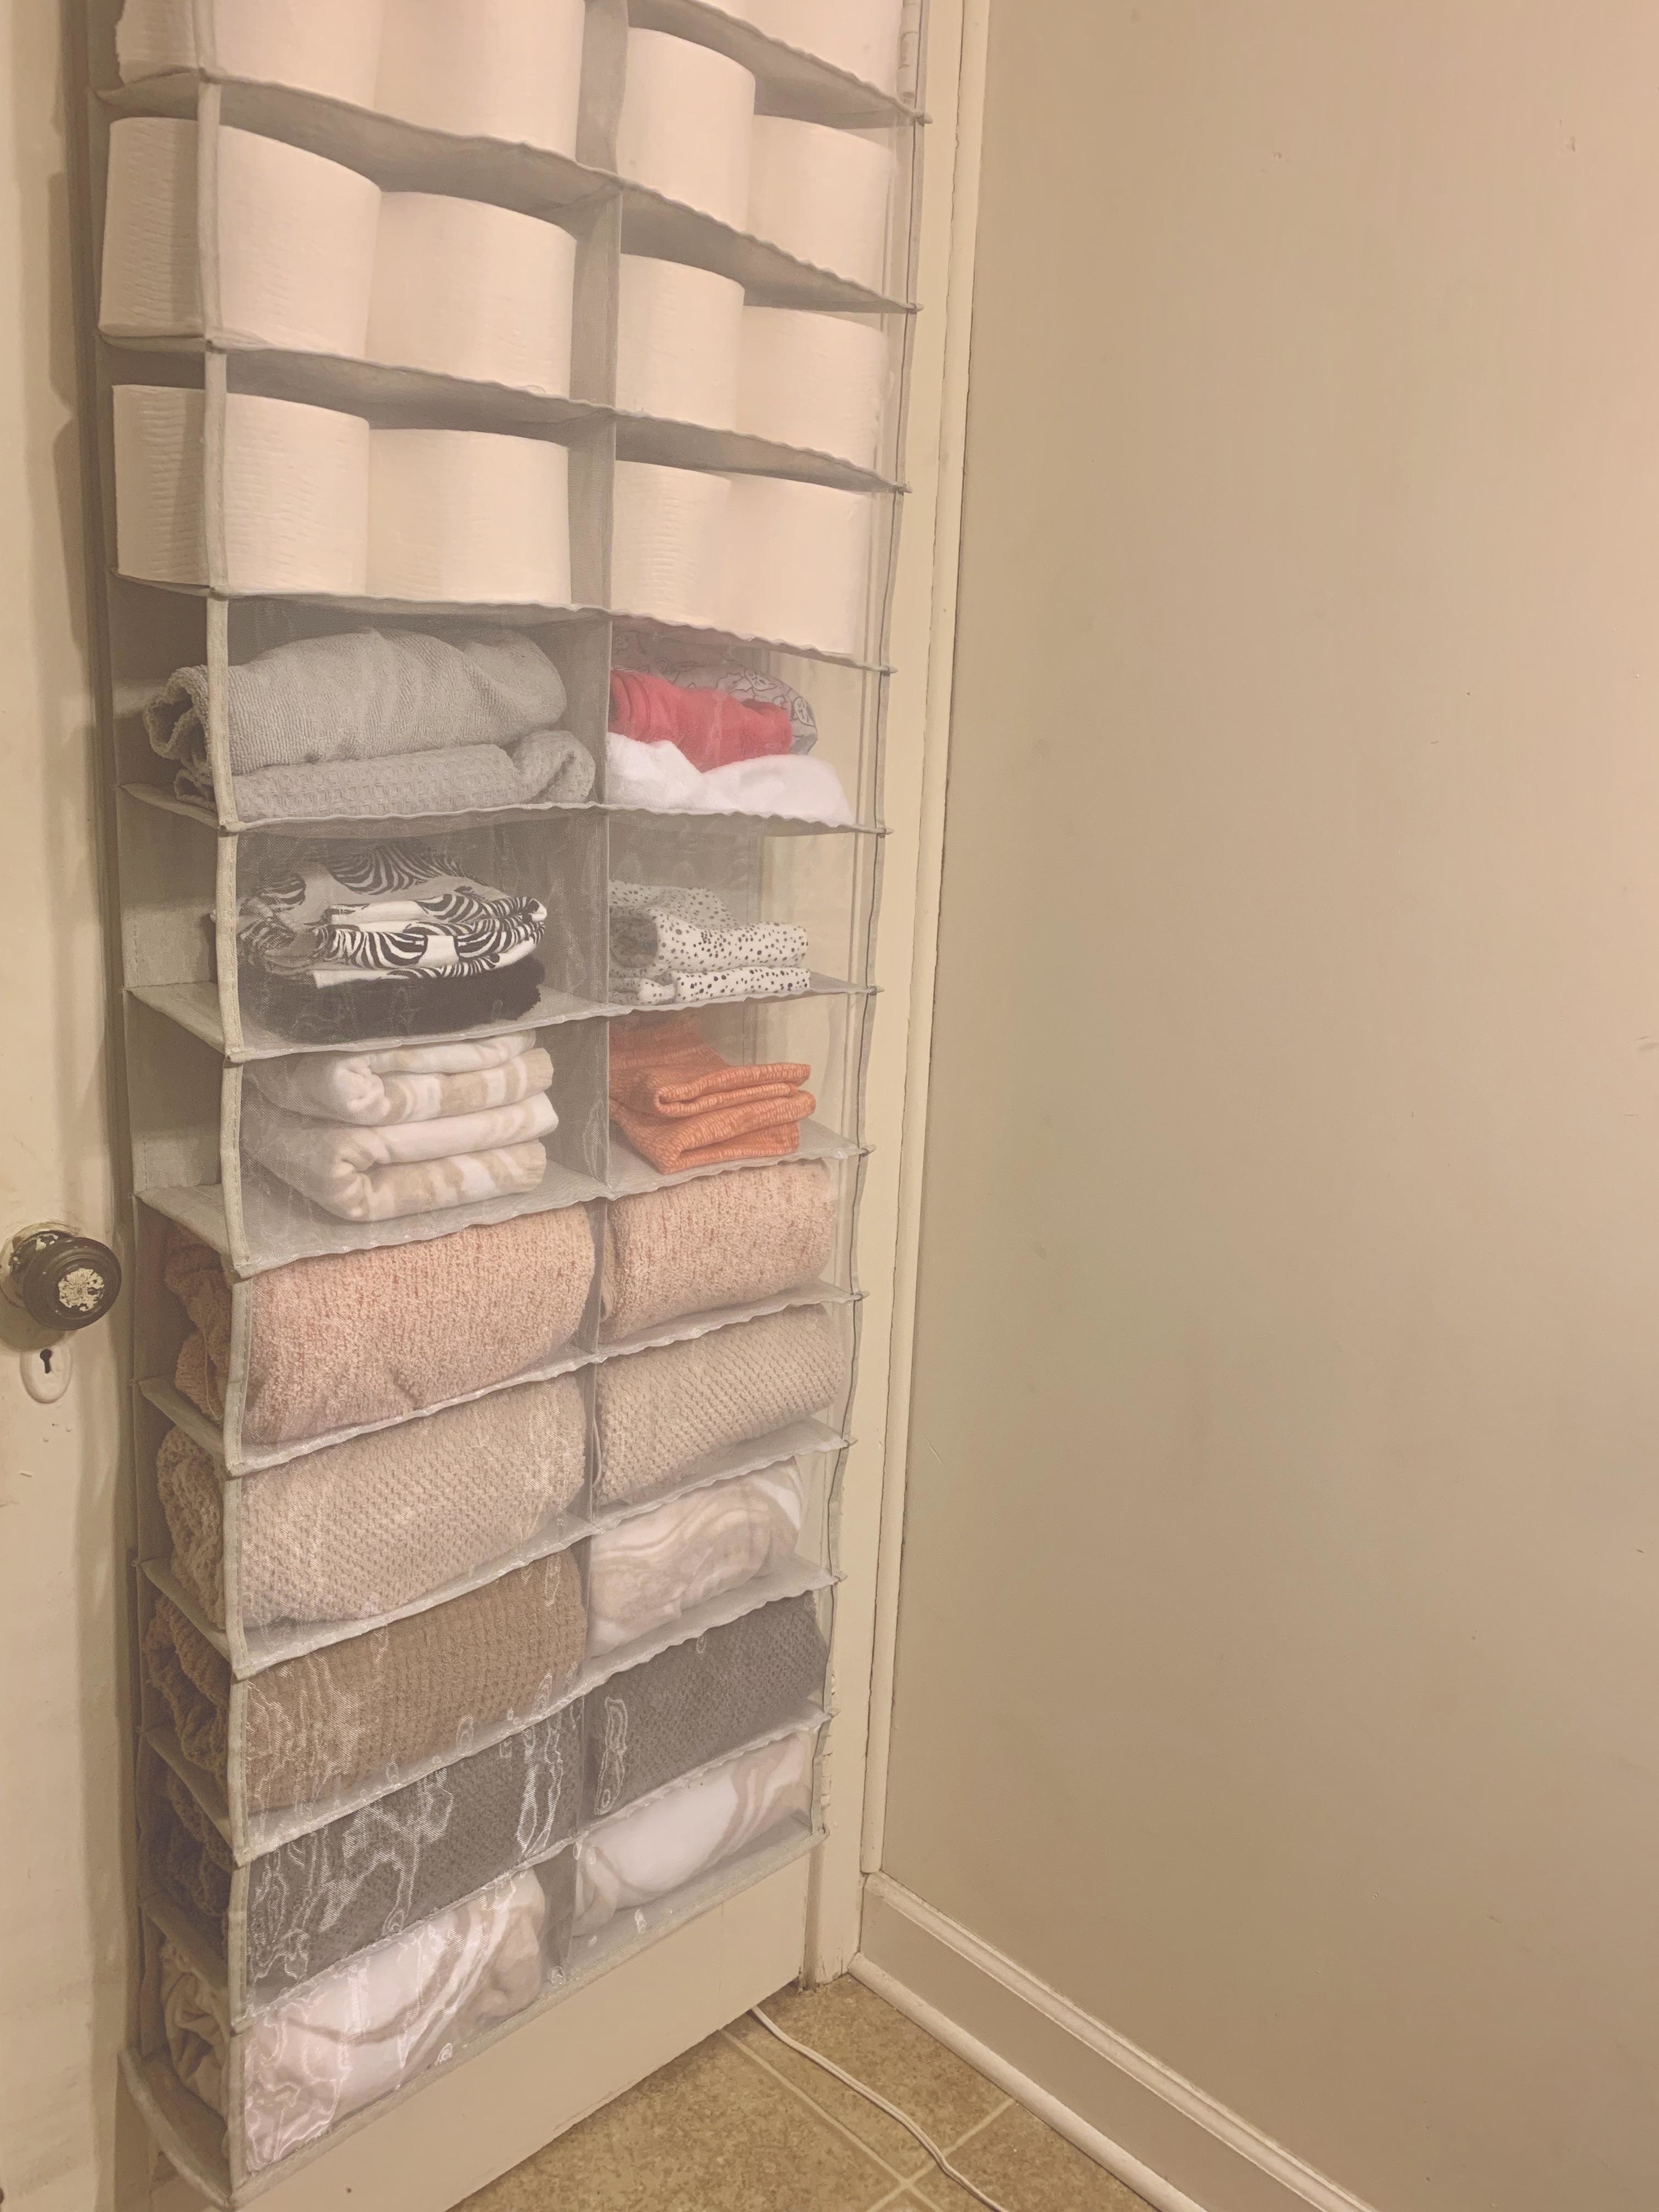 shoe organizer turned into a linen organizer with sheets, towels, and more